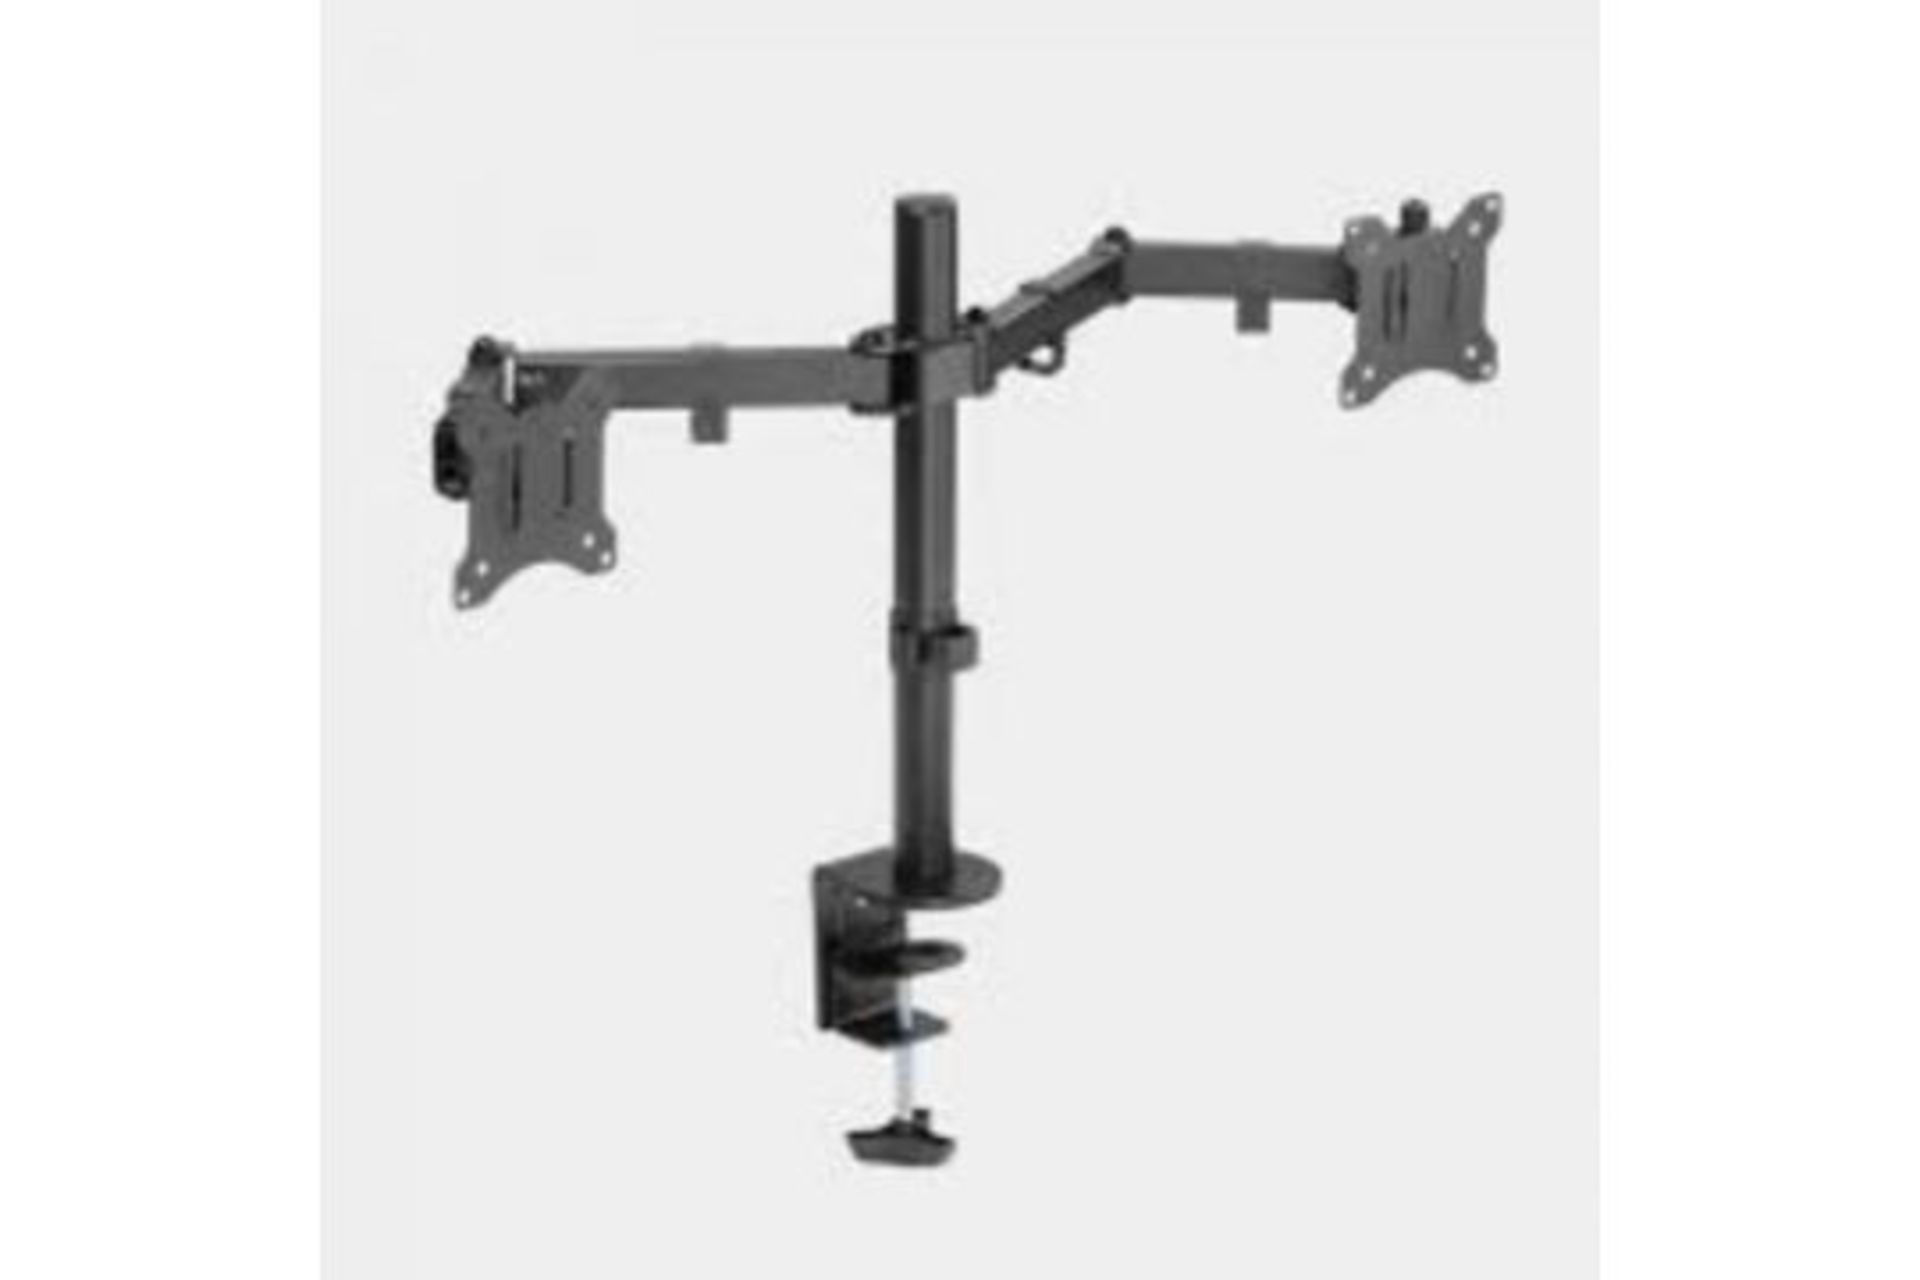 2 x NEW & BOXED Dual Arm Desk Mount with Stand. (3005074). Save valuable desk space and improve